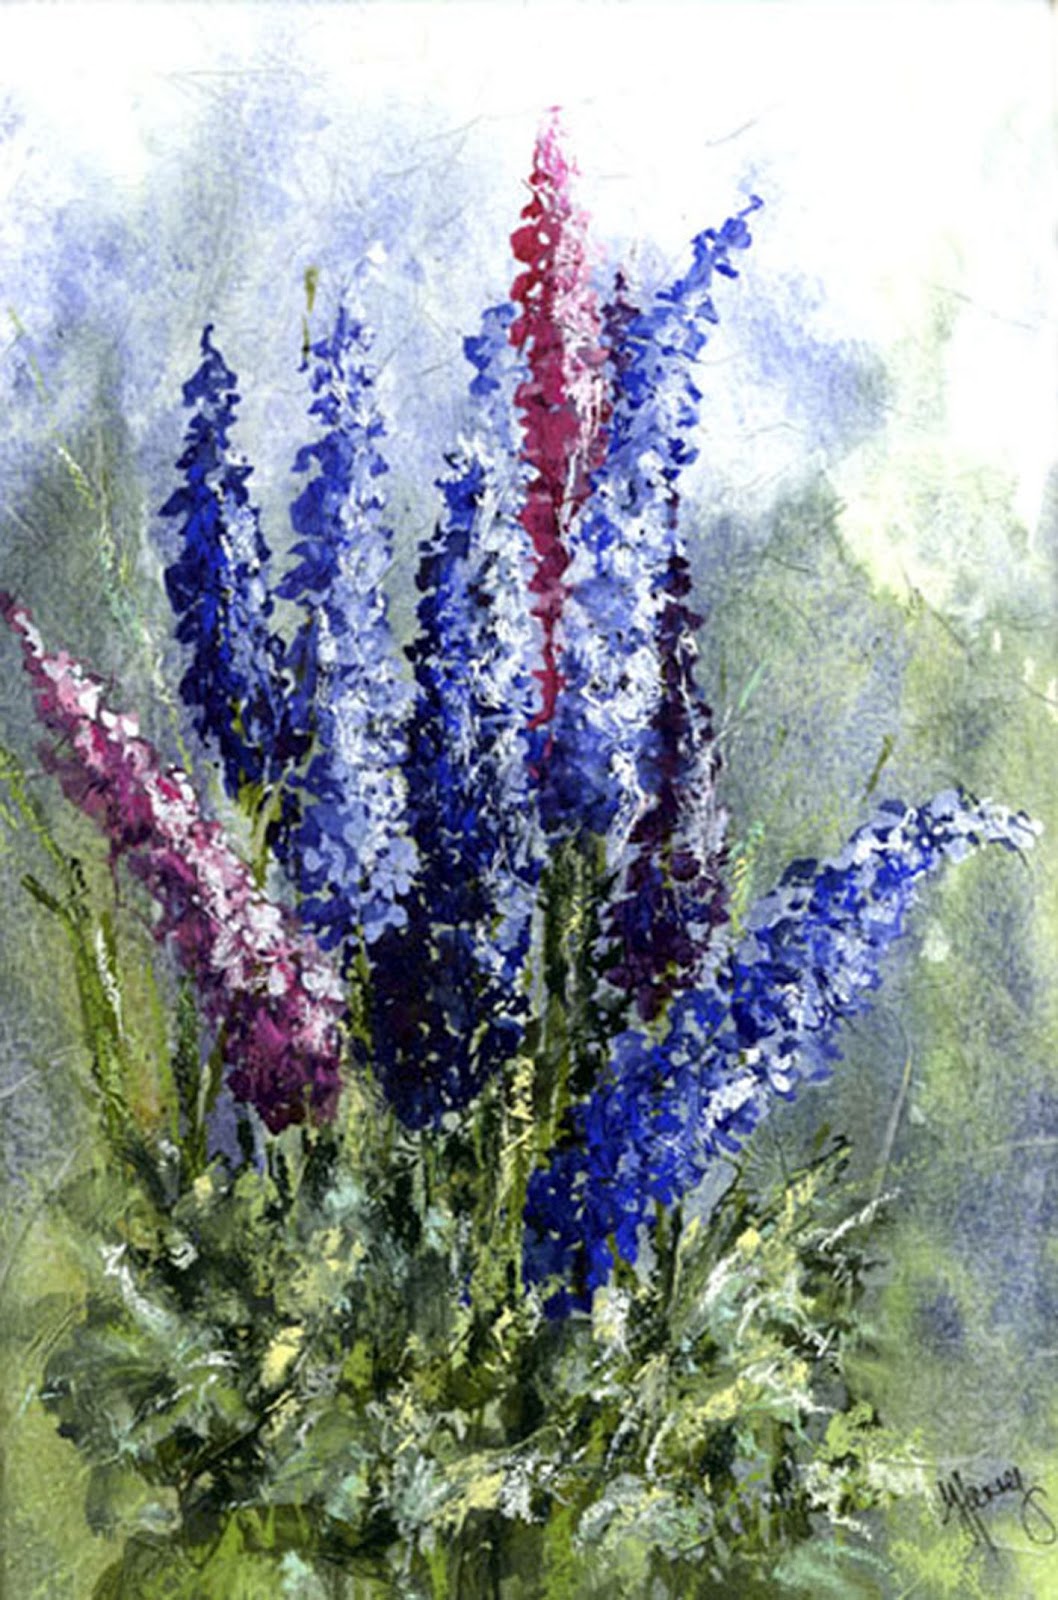 Watercolour Florals: May 2012